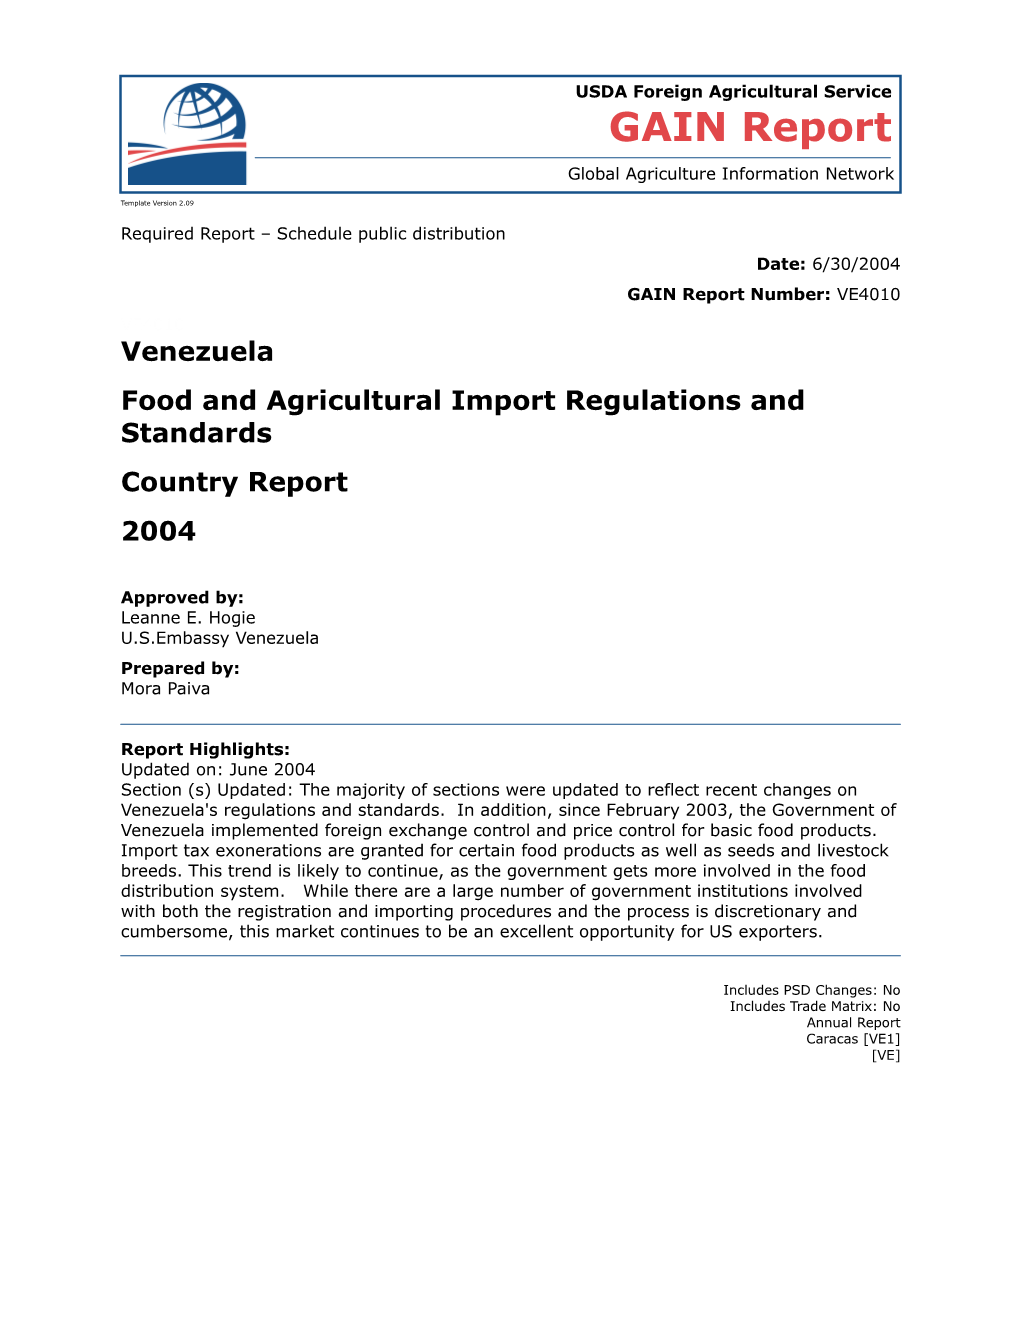 Food and Agricultural Import Regulations and Standards s9